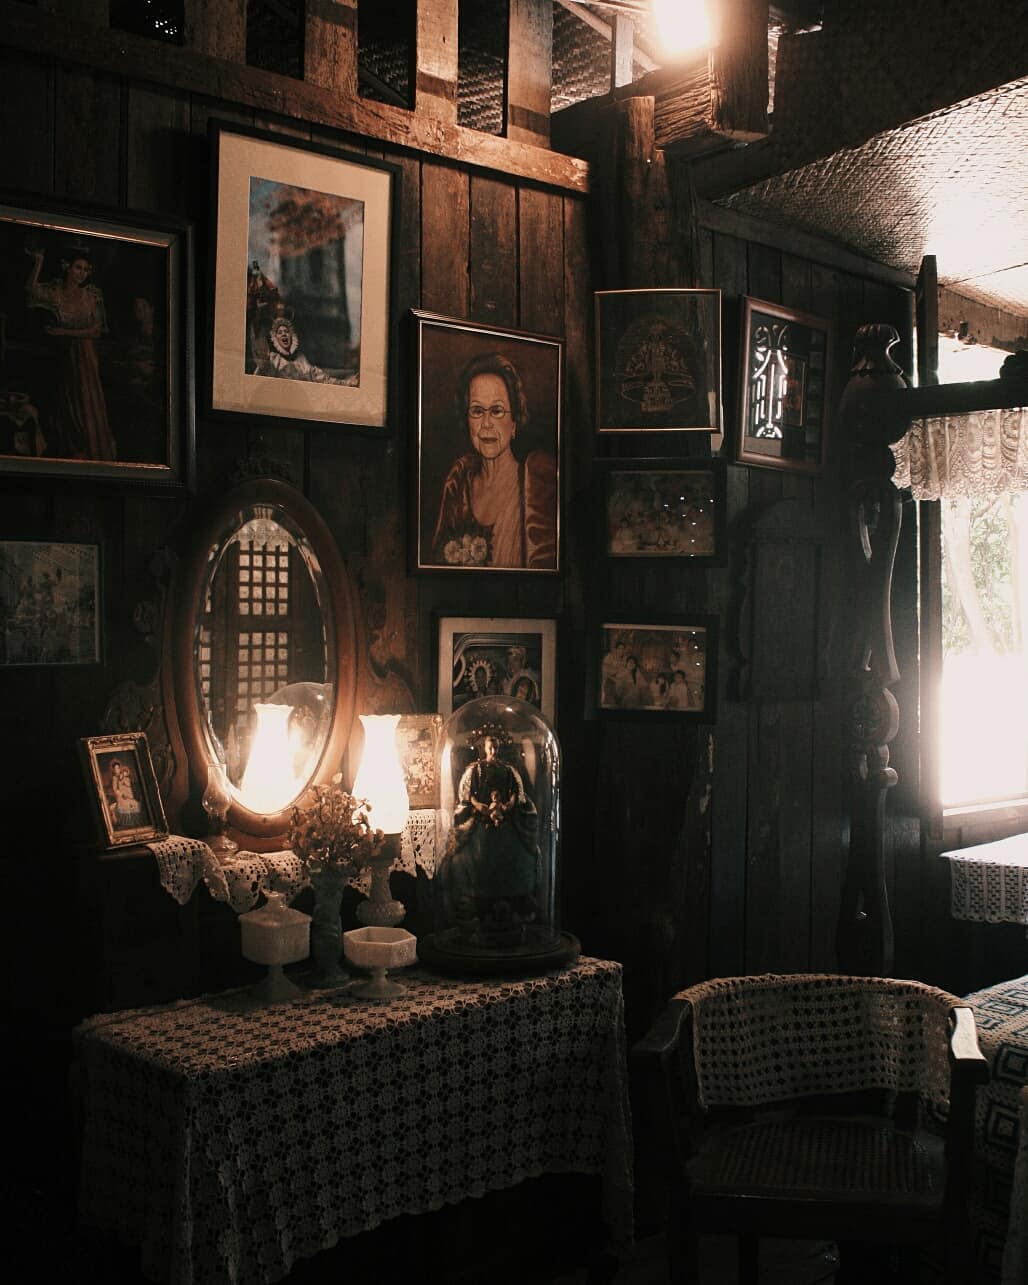 Curiosities that can be found insider the ancestral house